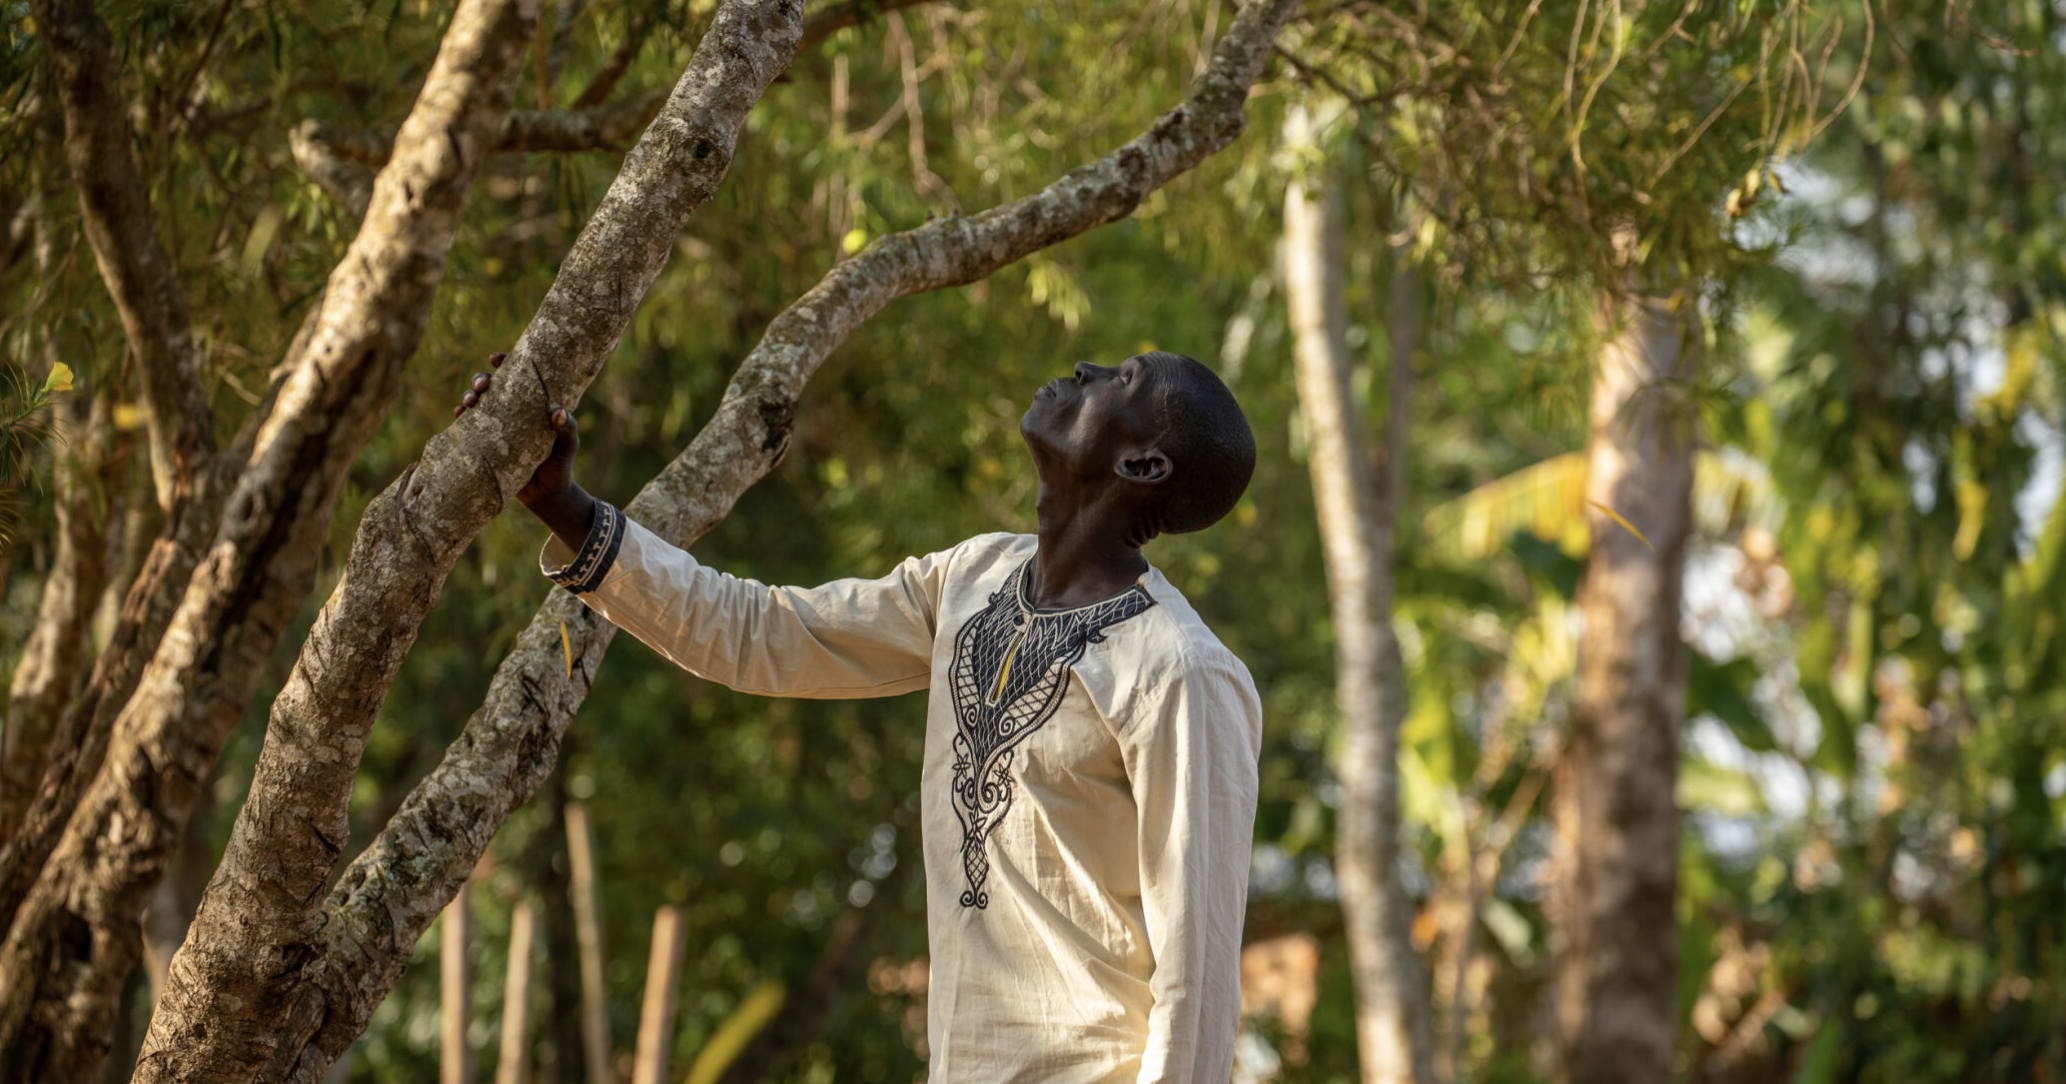 Ugandan man looks up at tree whilst holding a branch